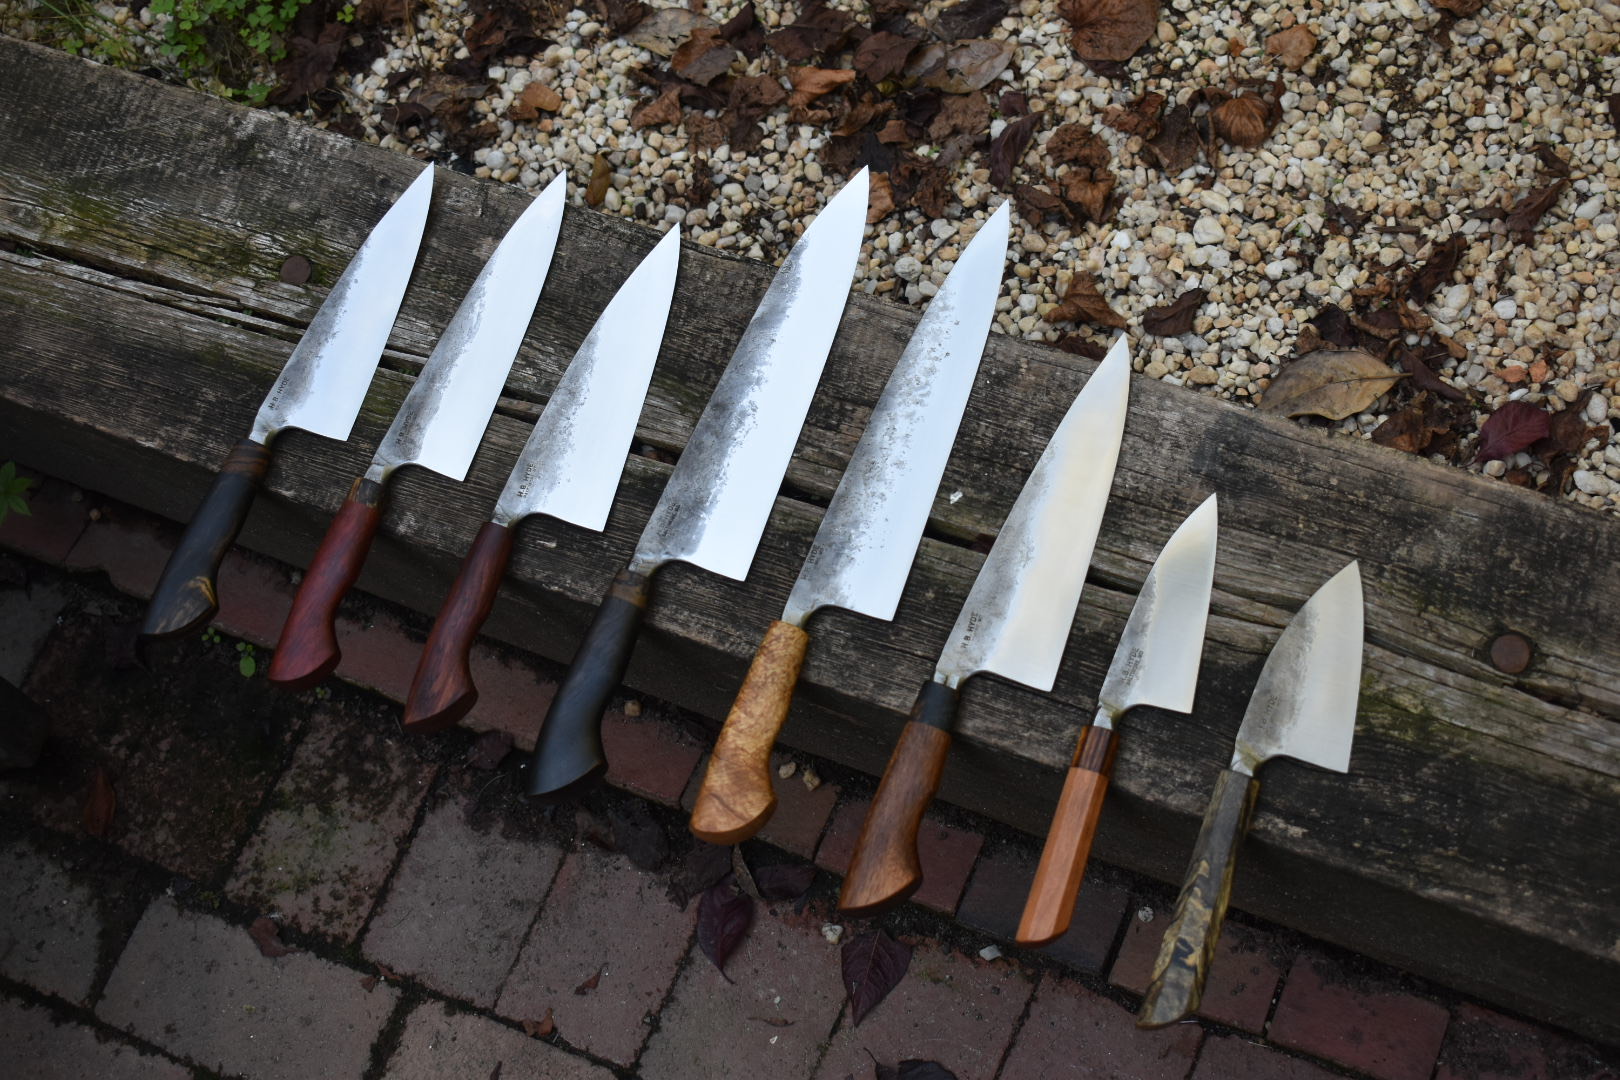 Chef's knives from Baltimore's own Henry Hyde.